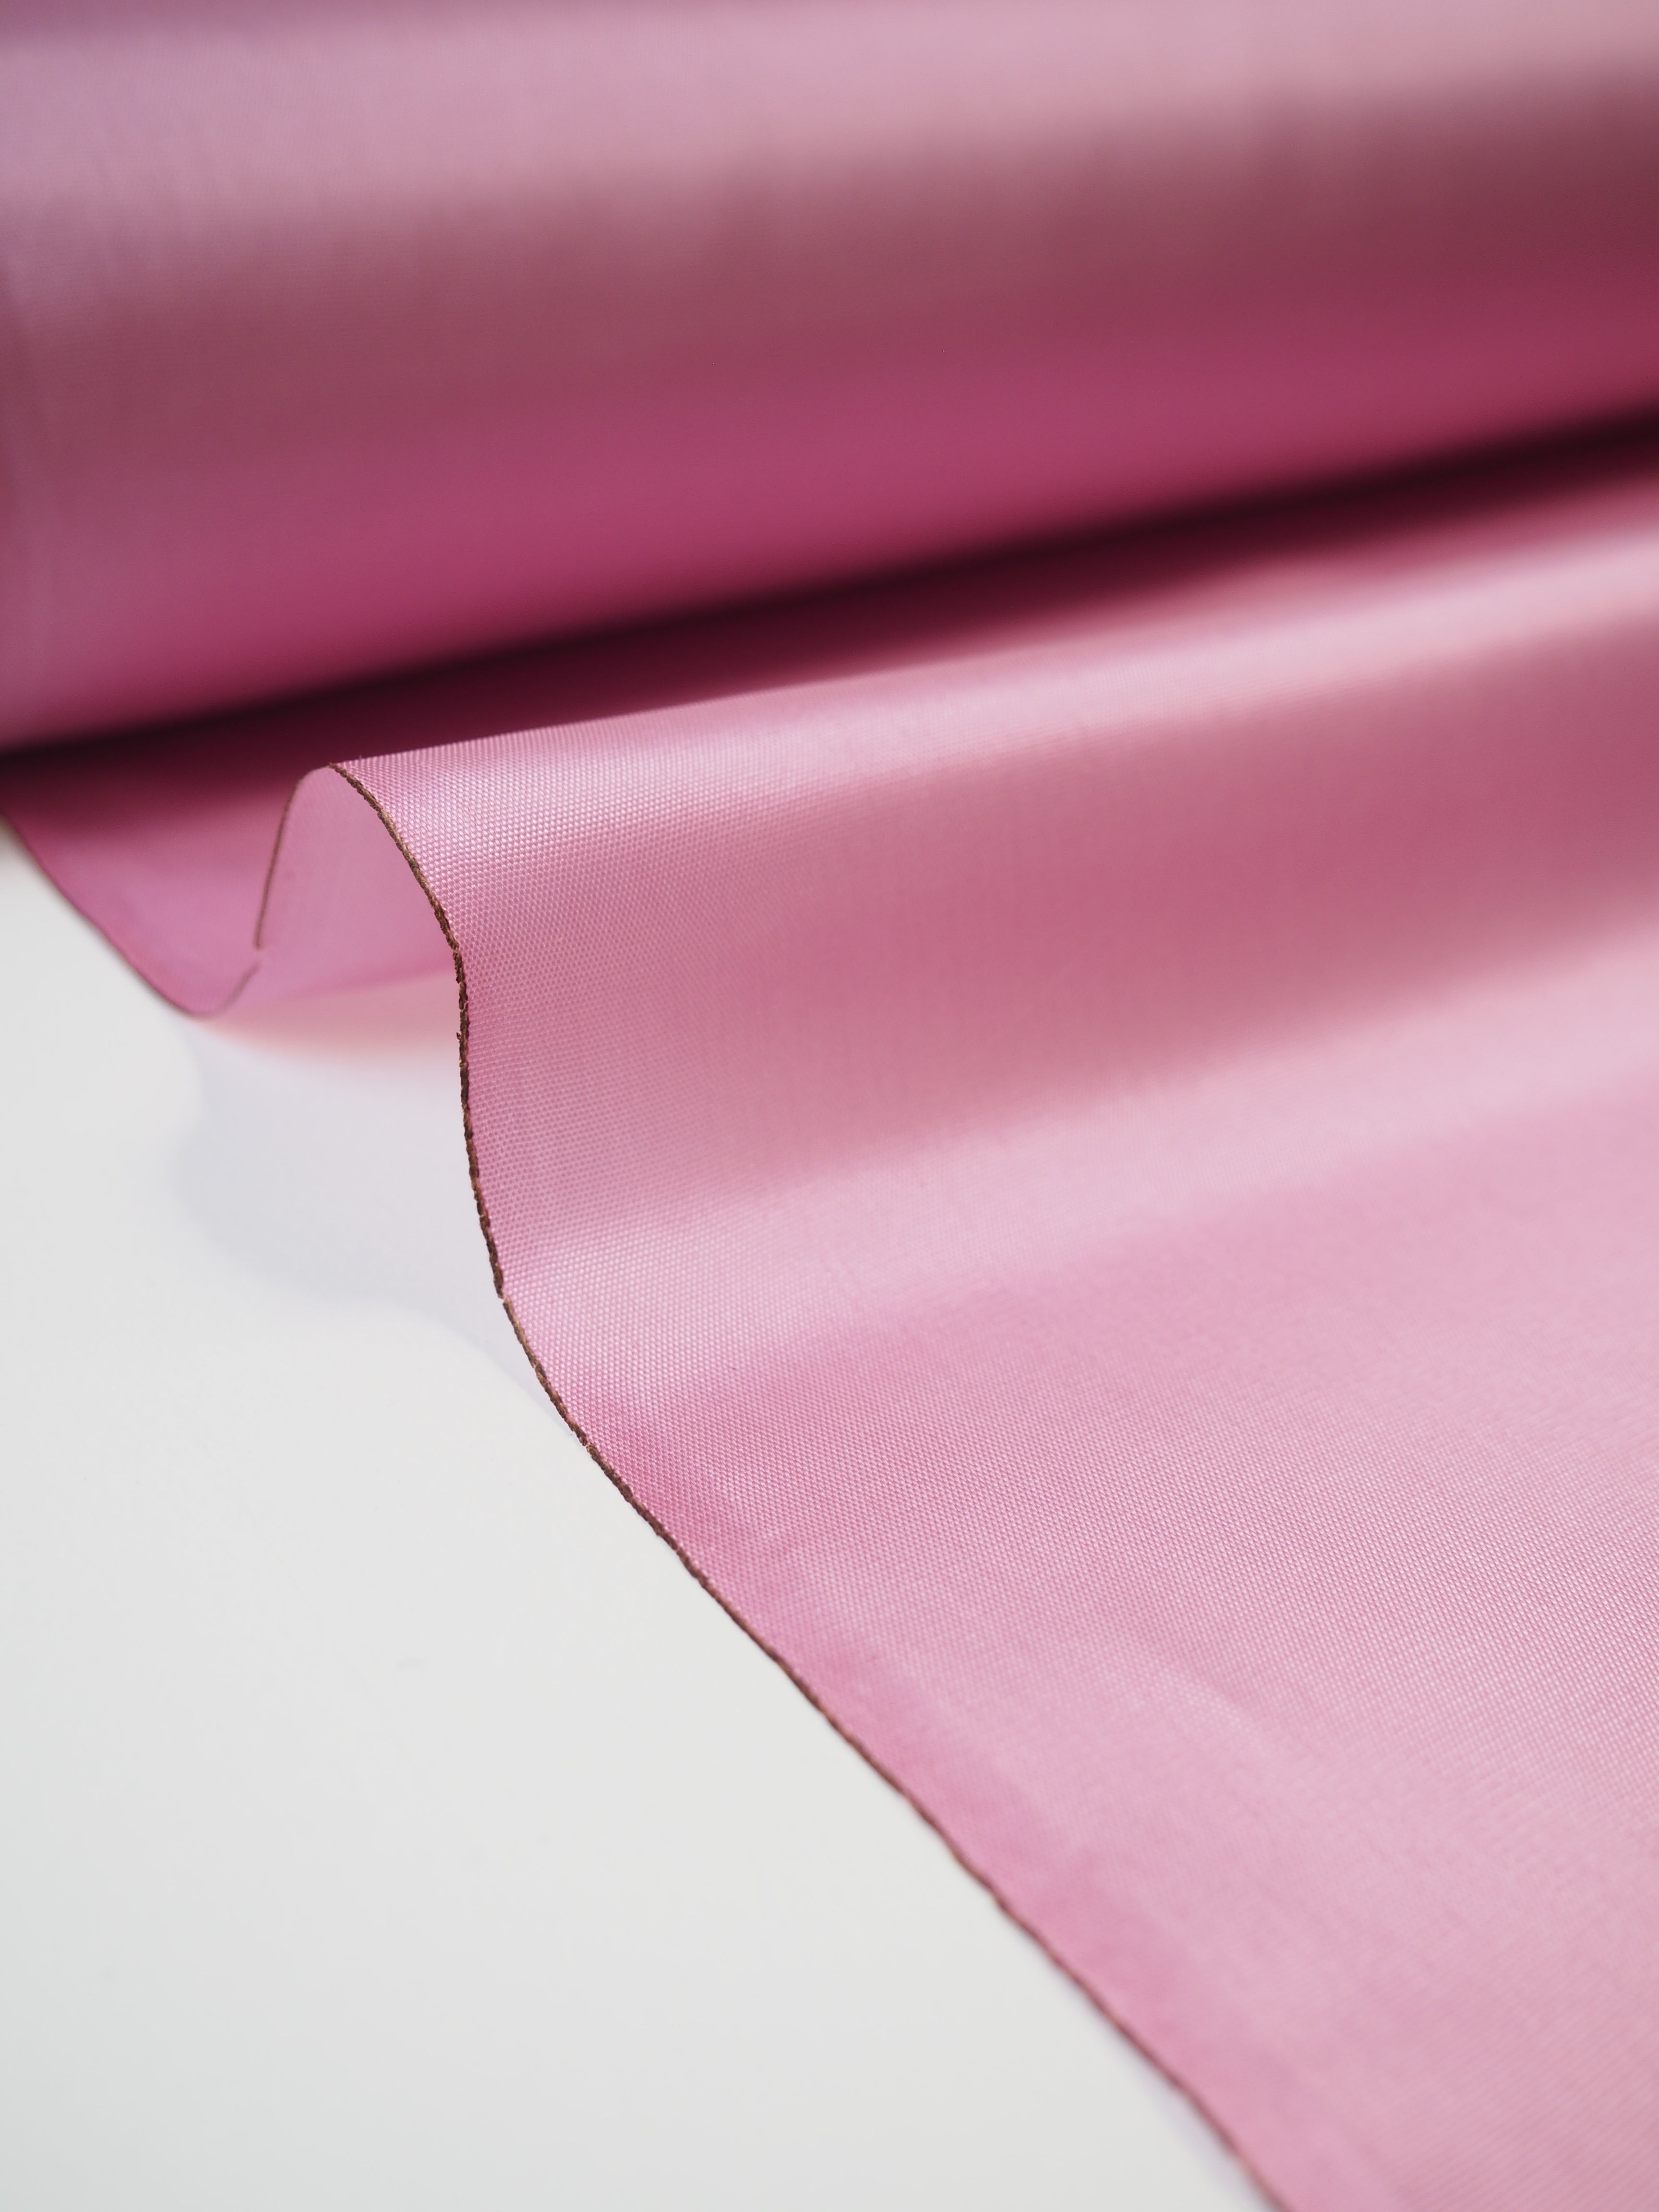 Baby Pink Cupro Lining, Plain Baby Pink Lining Fabric